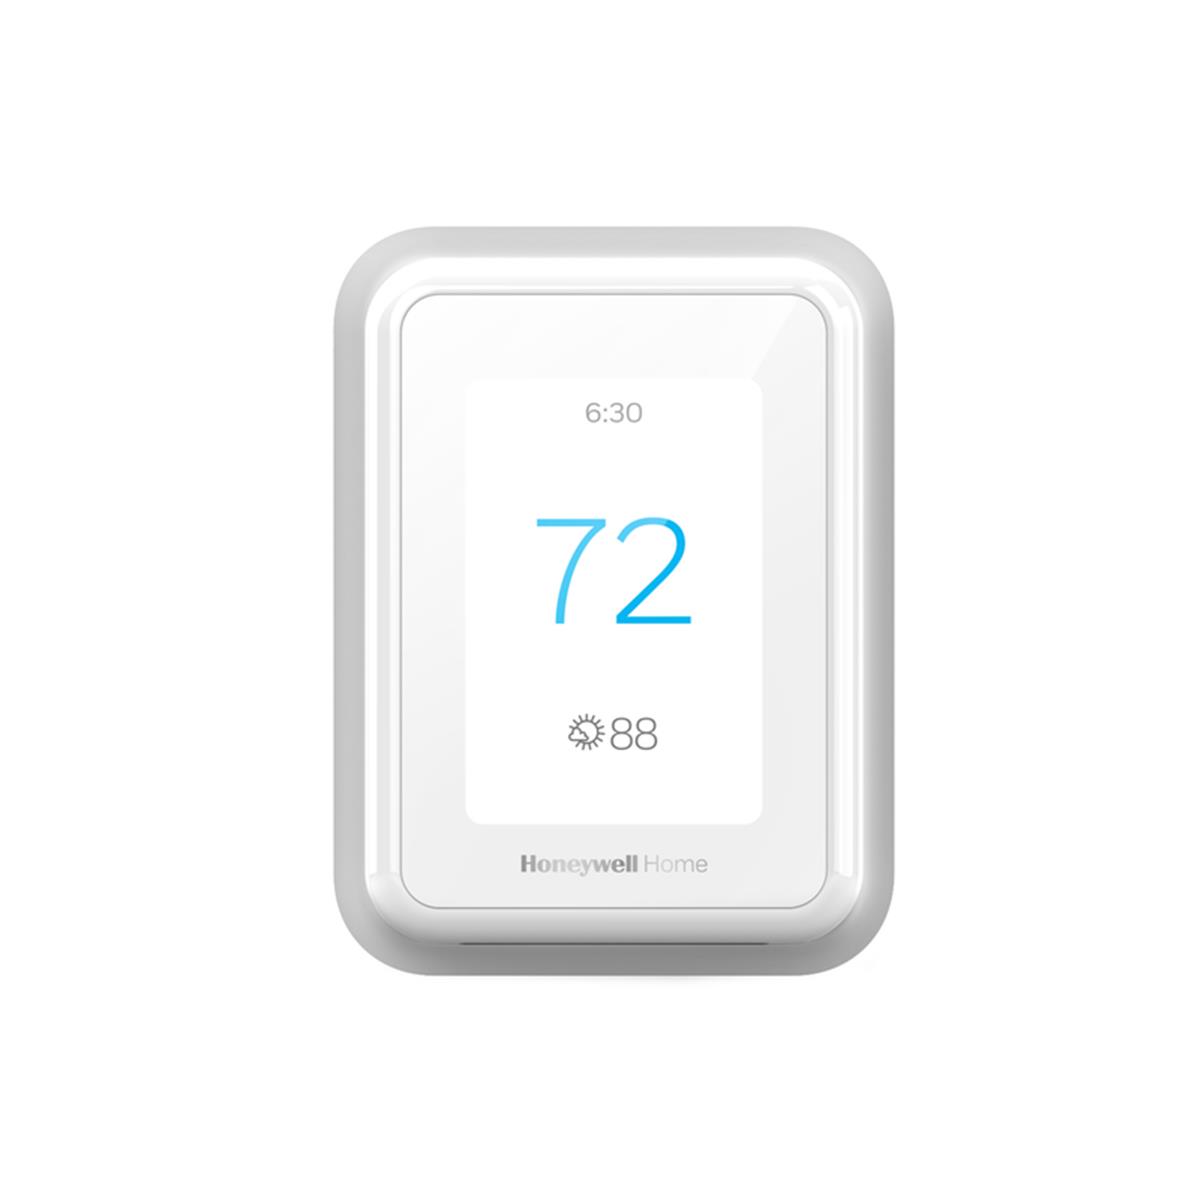 Picture of Honeywell 4003387 T9 Built in Wi-Fi Heating & Cooling Touch Screen Smart Thermostat